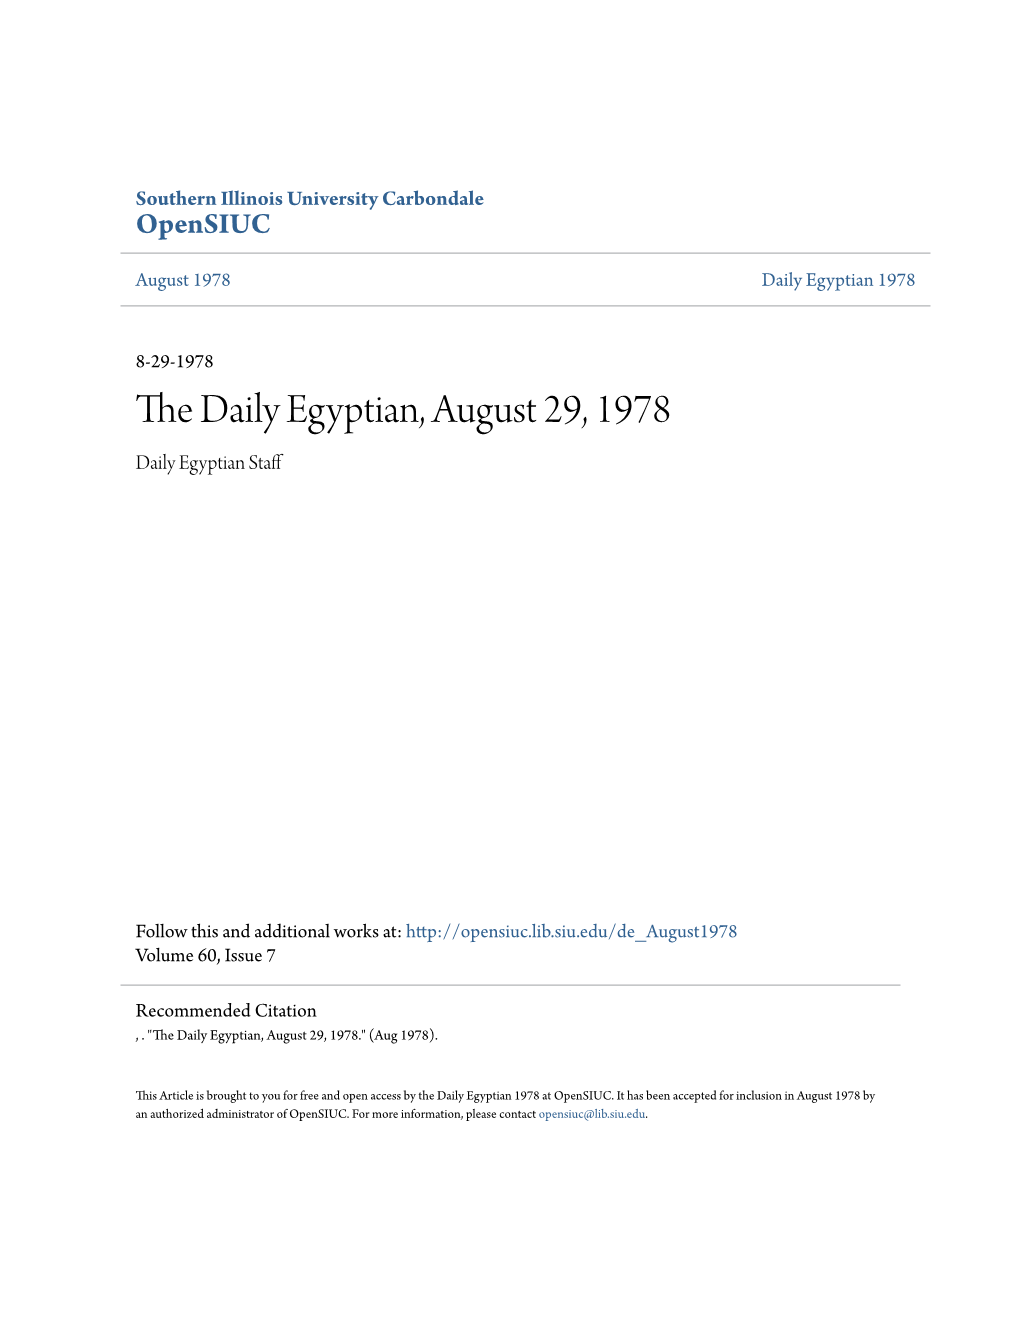 The Daily Egyptian, August 29, 1978